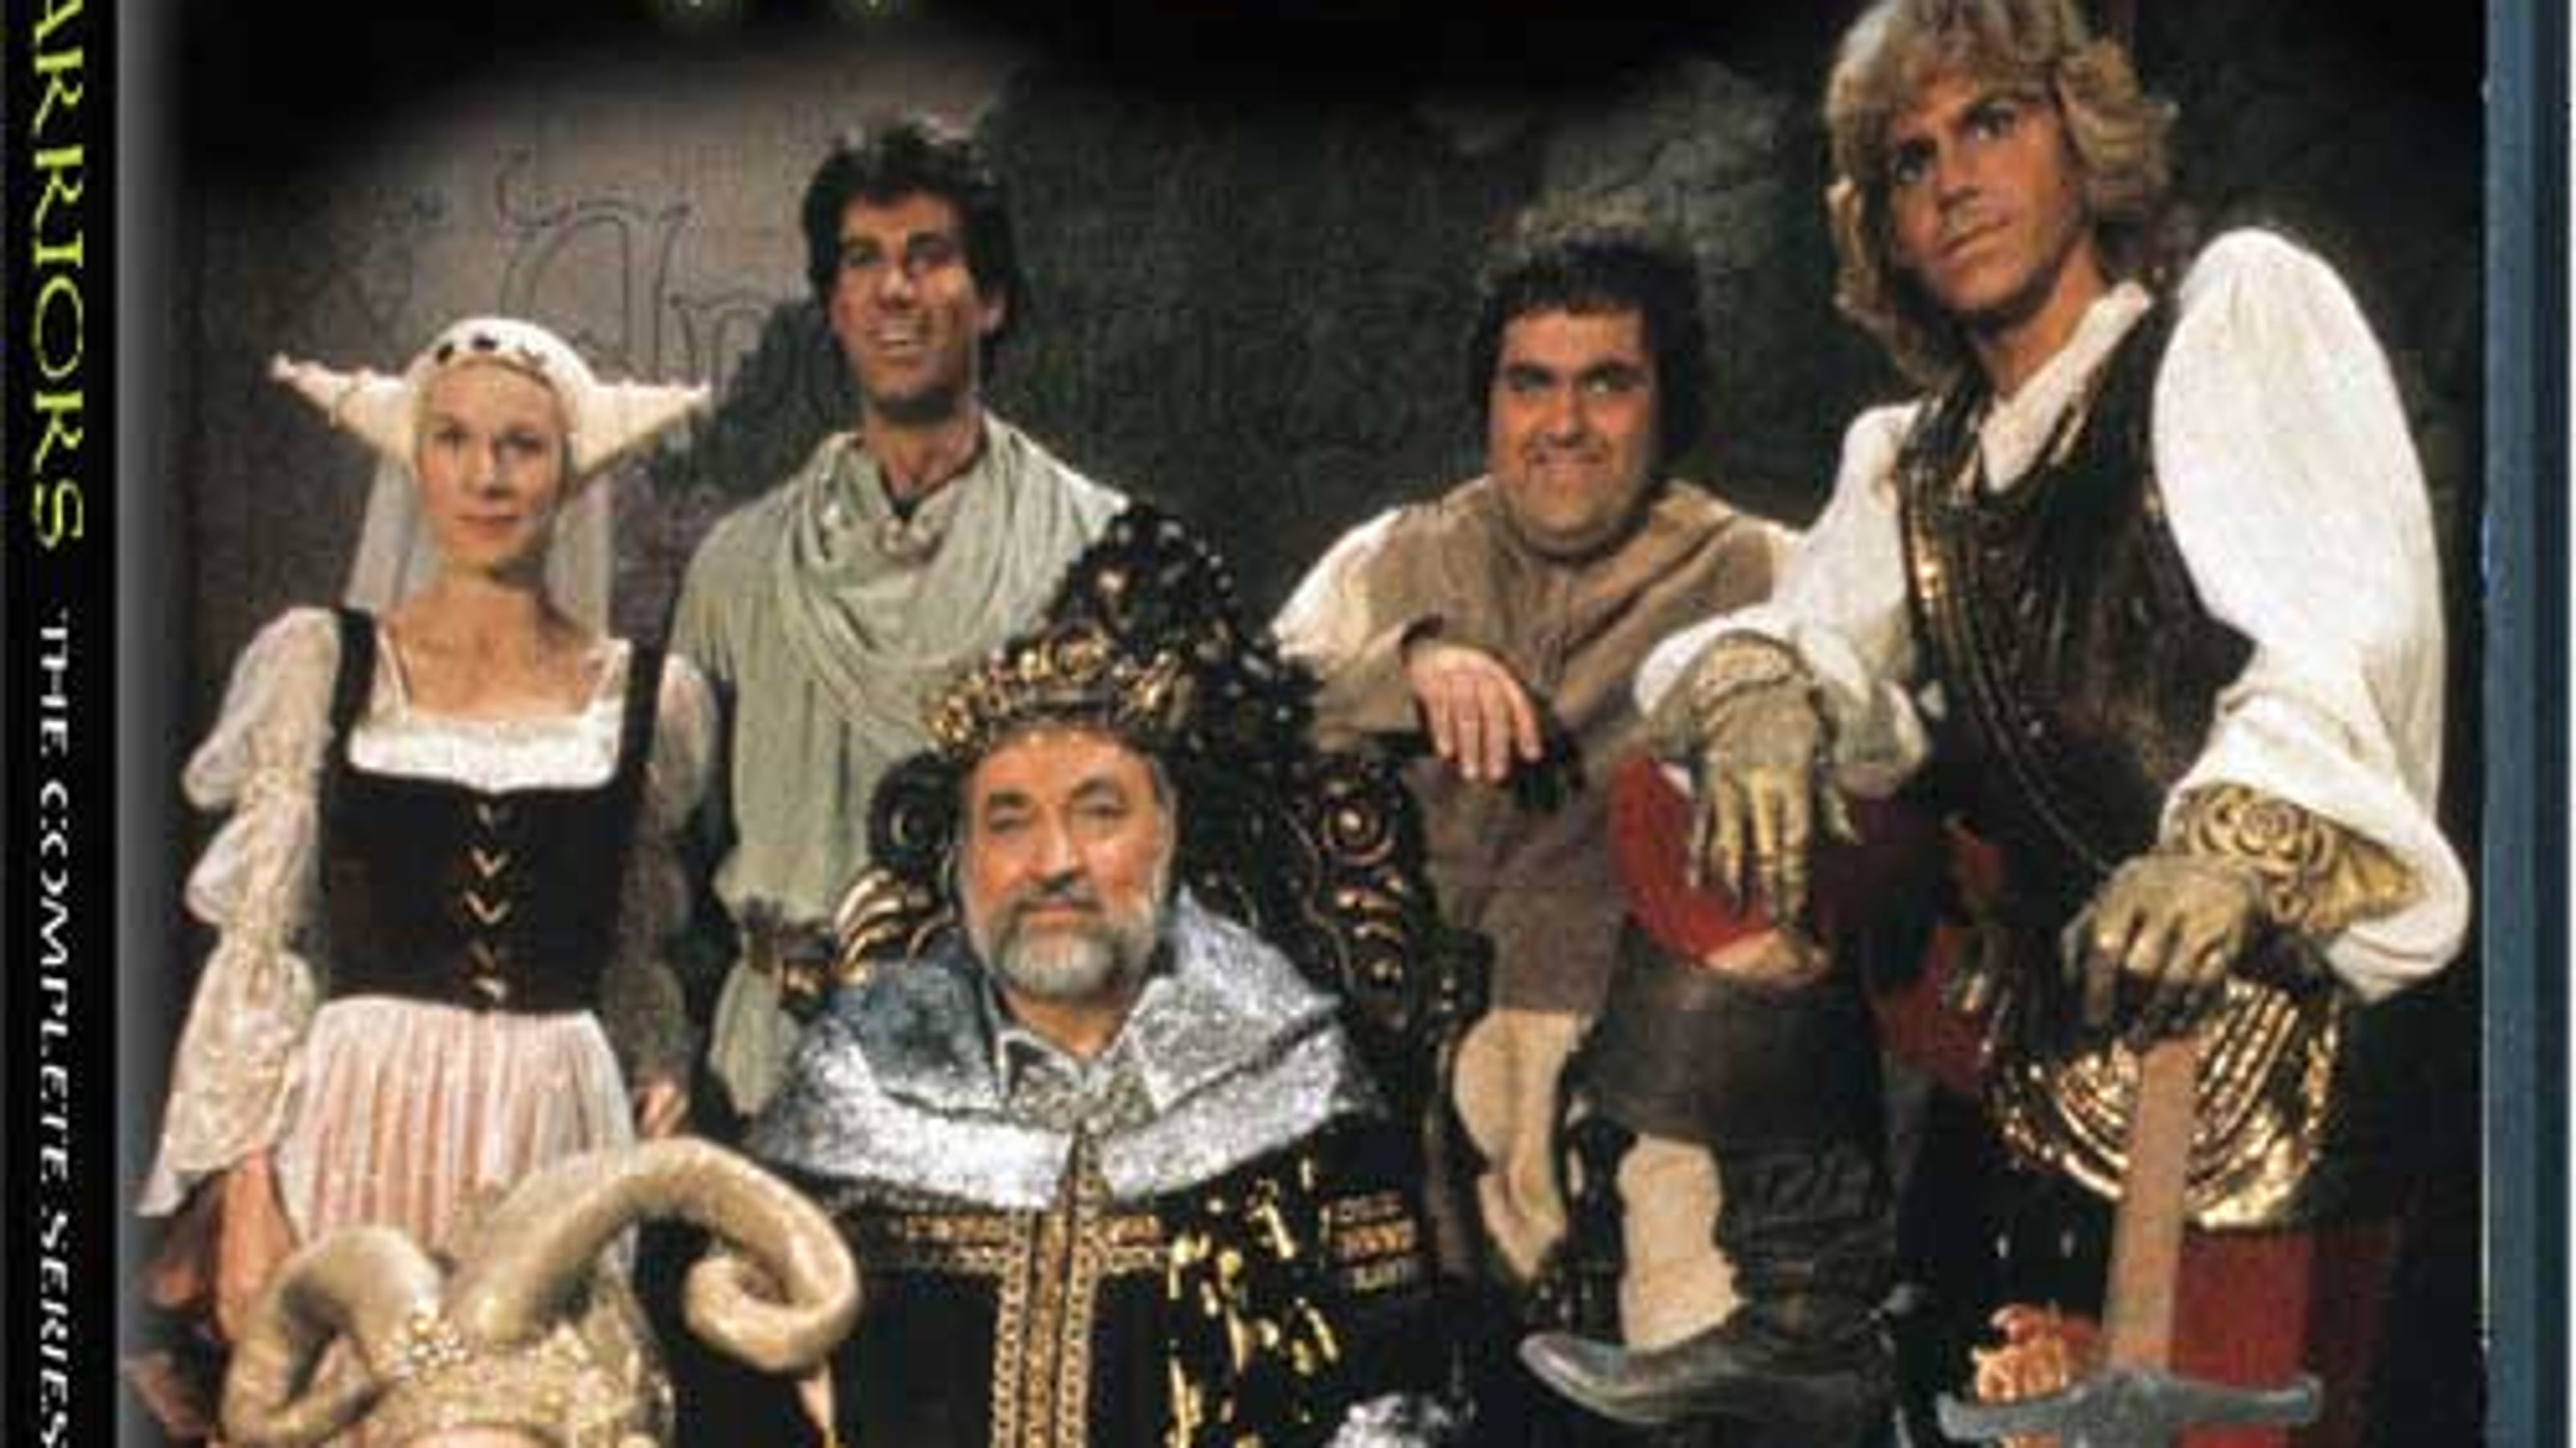 'Wizards and Warriors': Cult '80s TV series comes to DVD